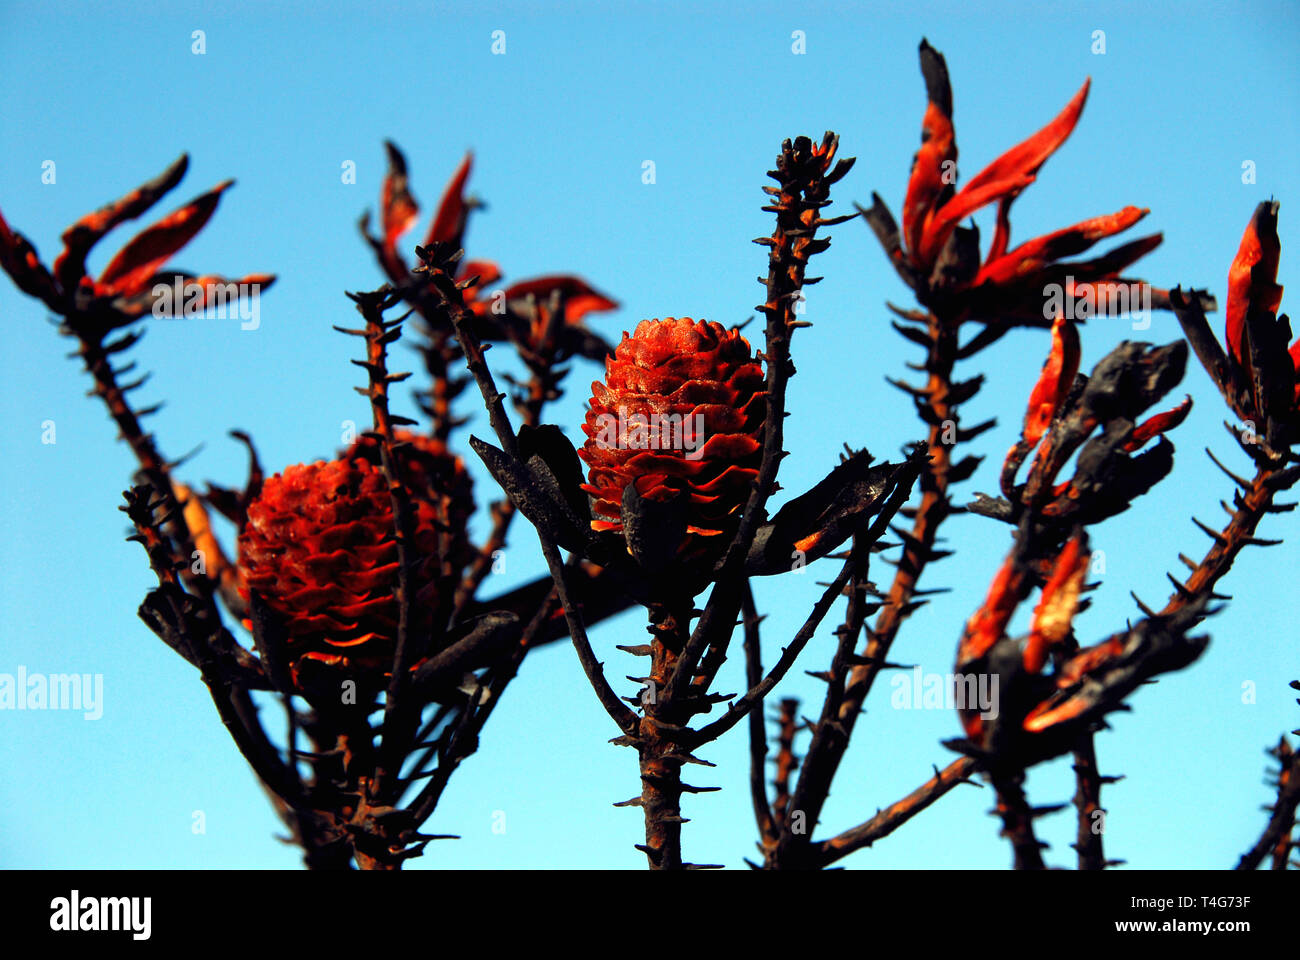 The fires on the cape peninsula of South Africa left burned Proteas on the beach. Fires actually open the seeds for propagation. Stock Photo